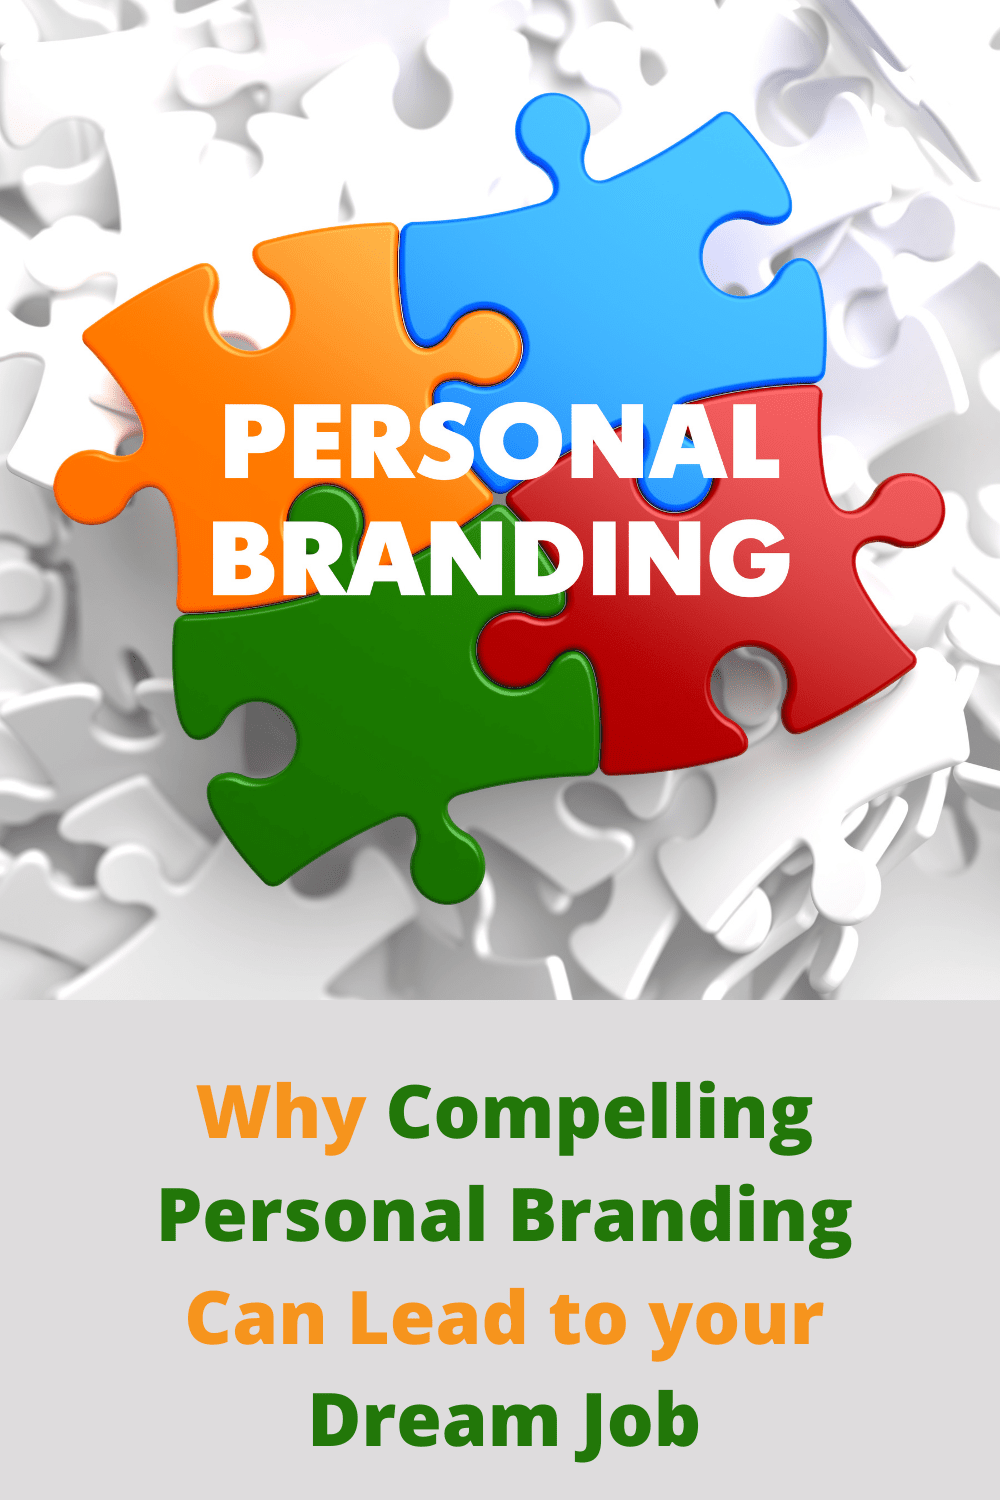 Why Compelling Personal Branding Can Lead to your Dream Job